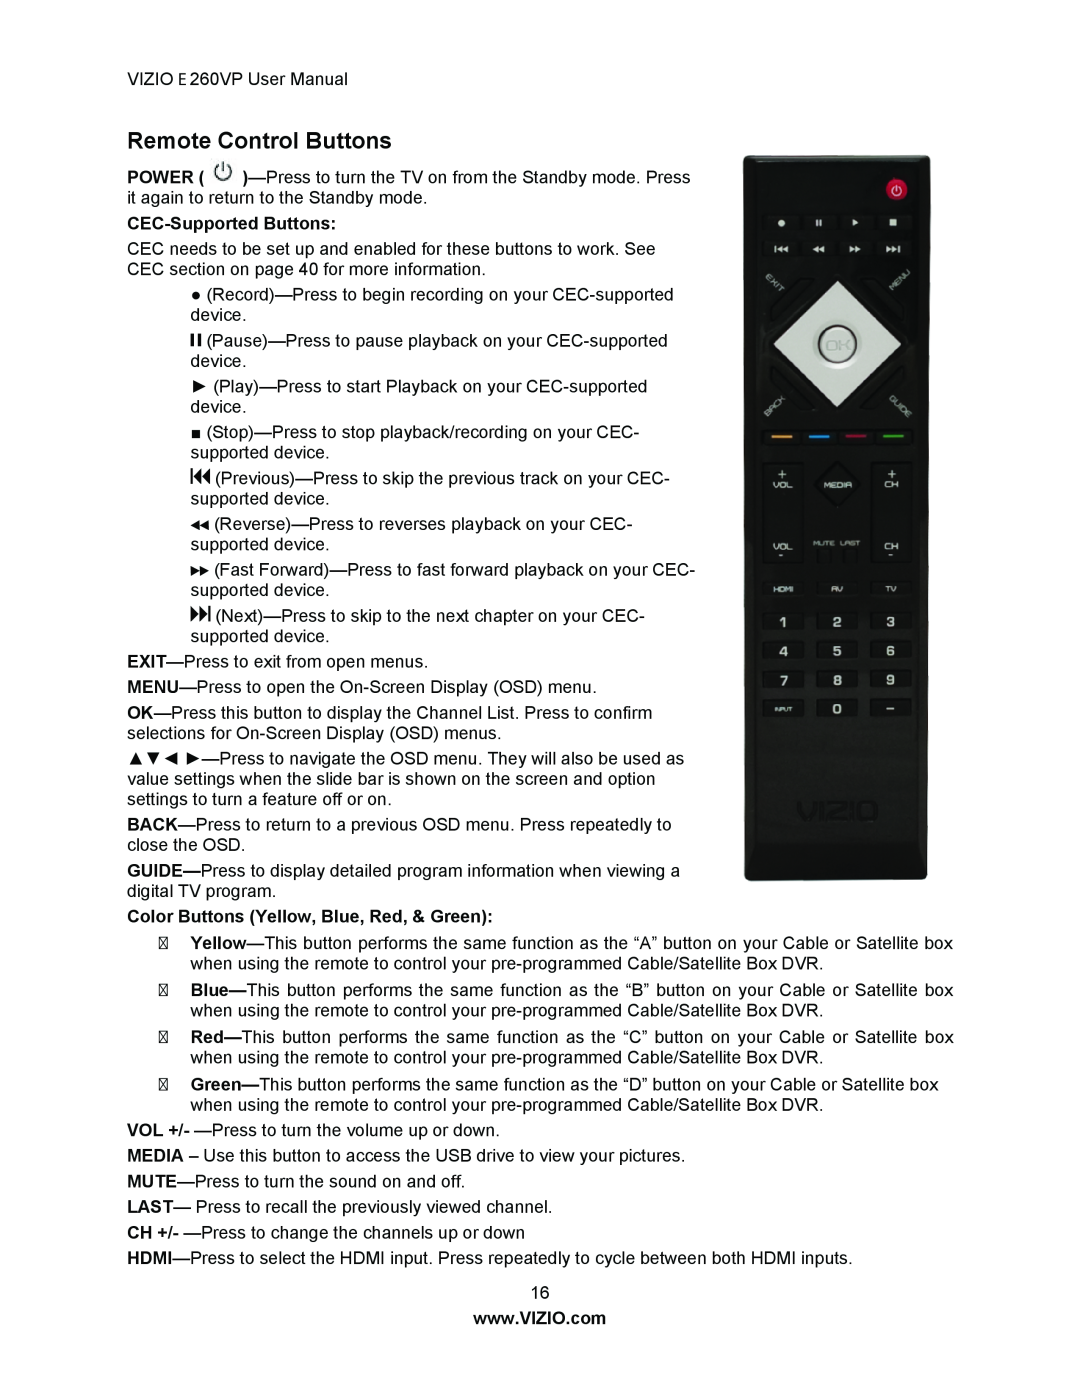 Vizio E260VP user manual Remote Control Buttons, CEC-Supported Buttons, Color Buttons Yellow, Blue, Red, & Green 